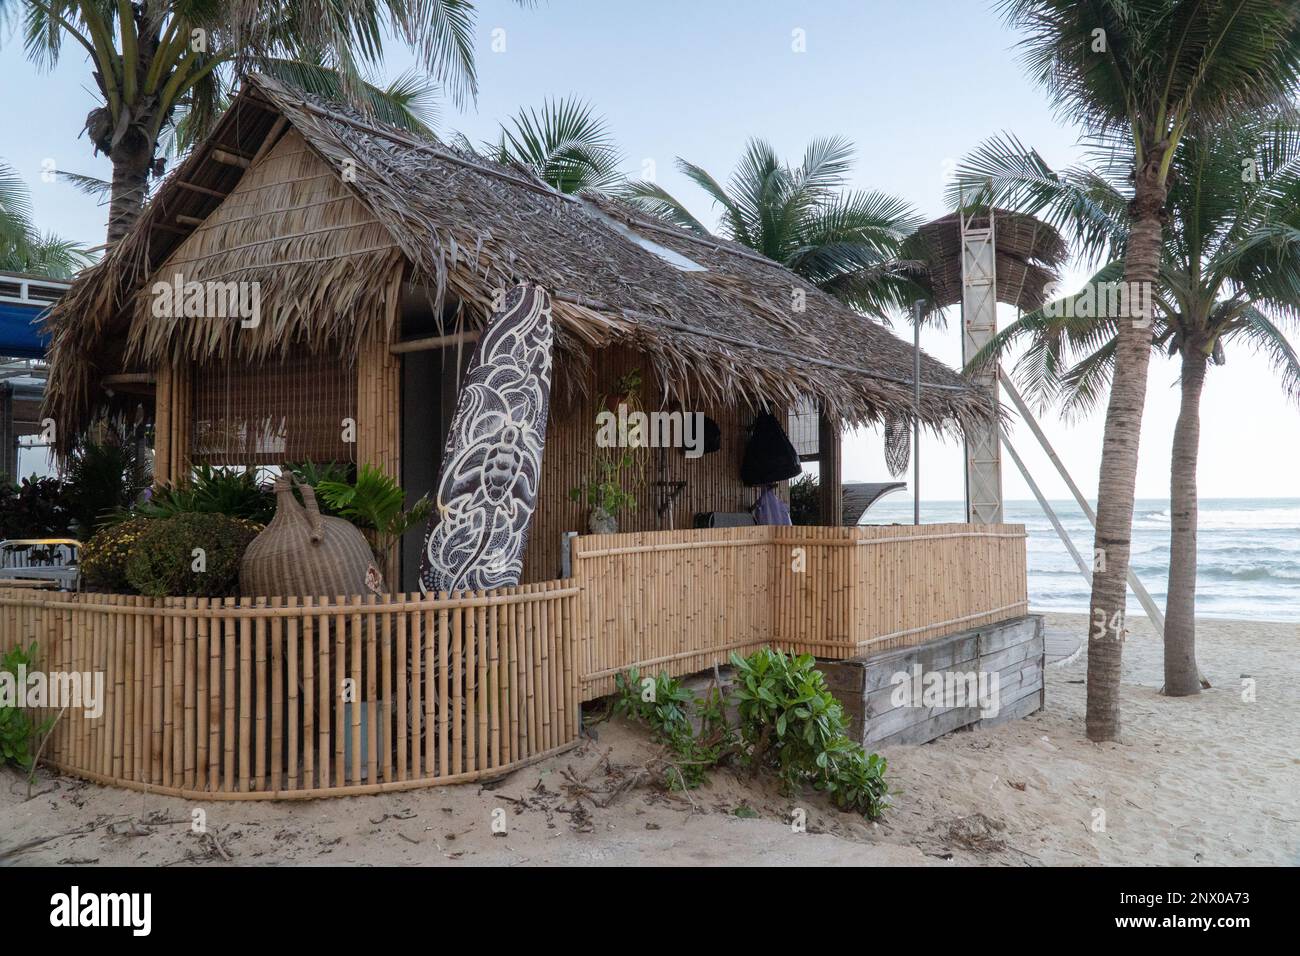 Beach bungalow made of palm leaves on the beach with a surfboard Stock Photo